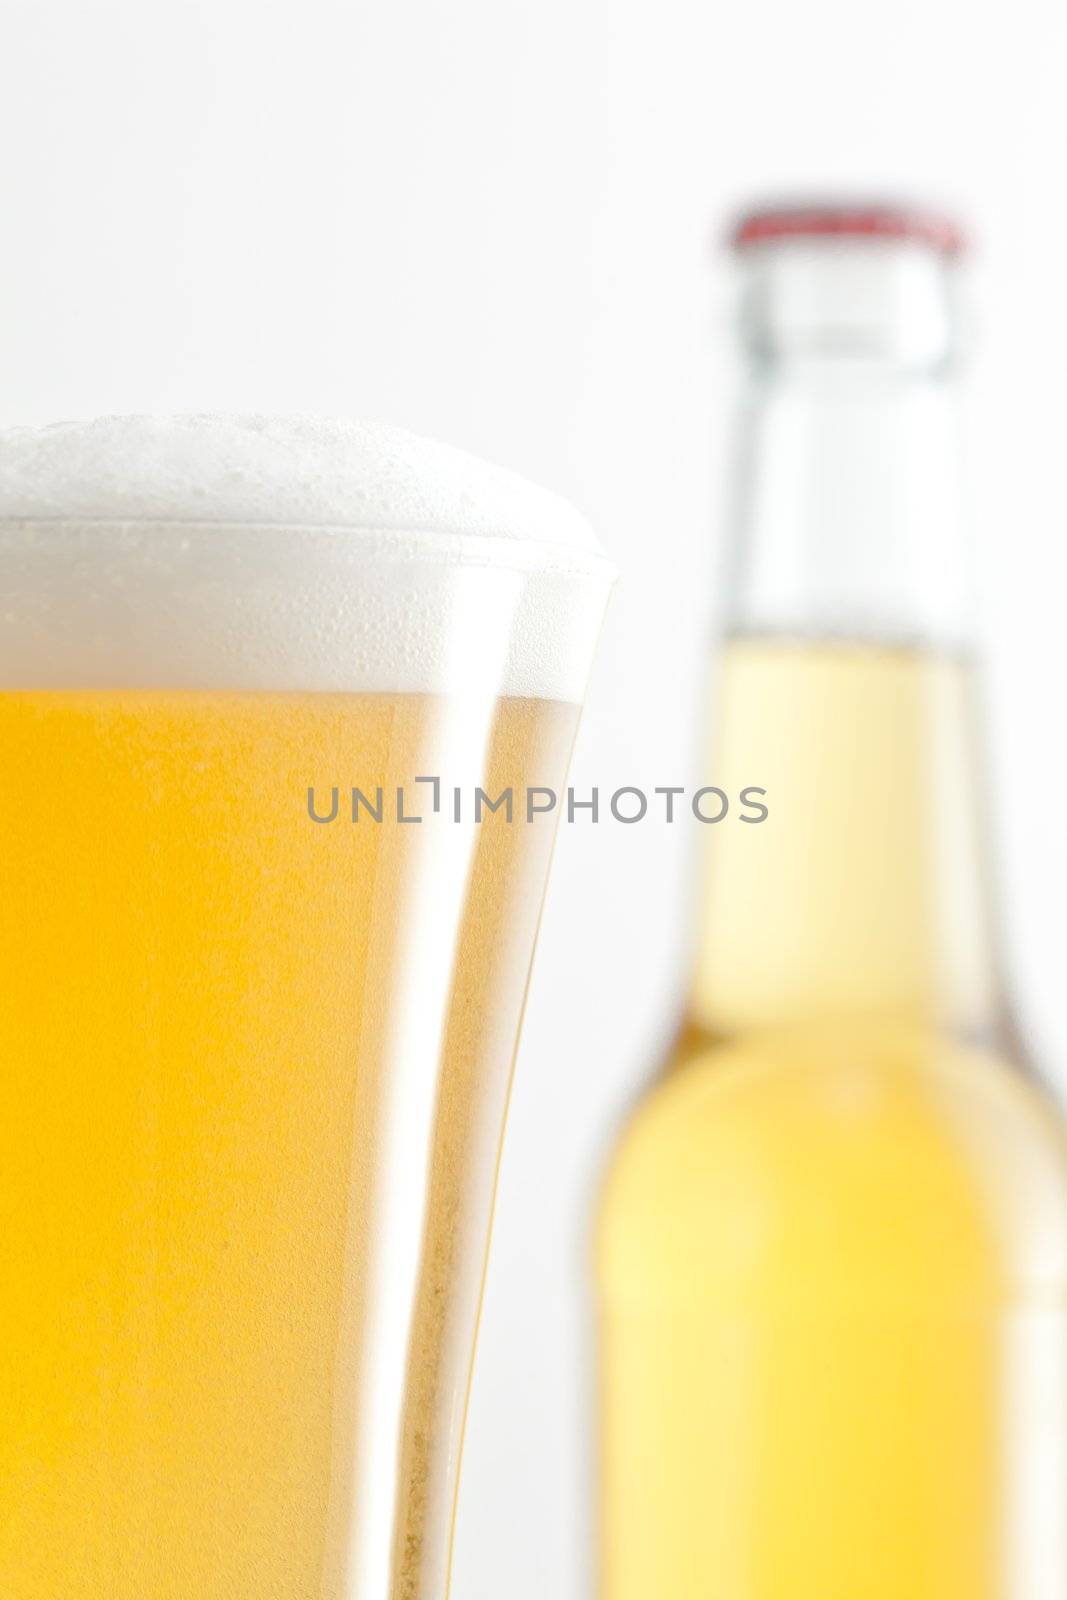 Bottle and glass full of beer against a white background